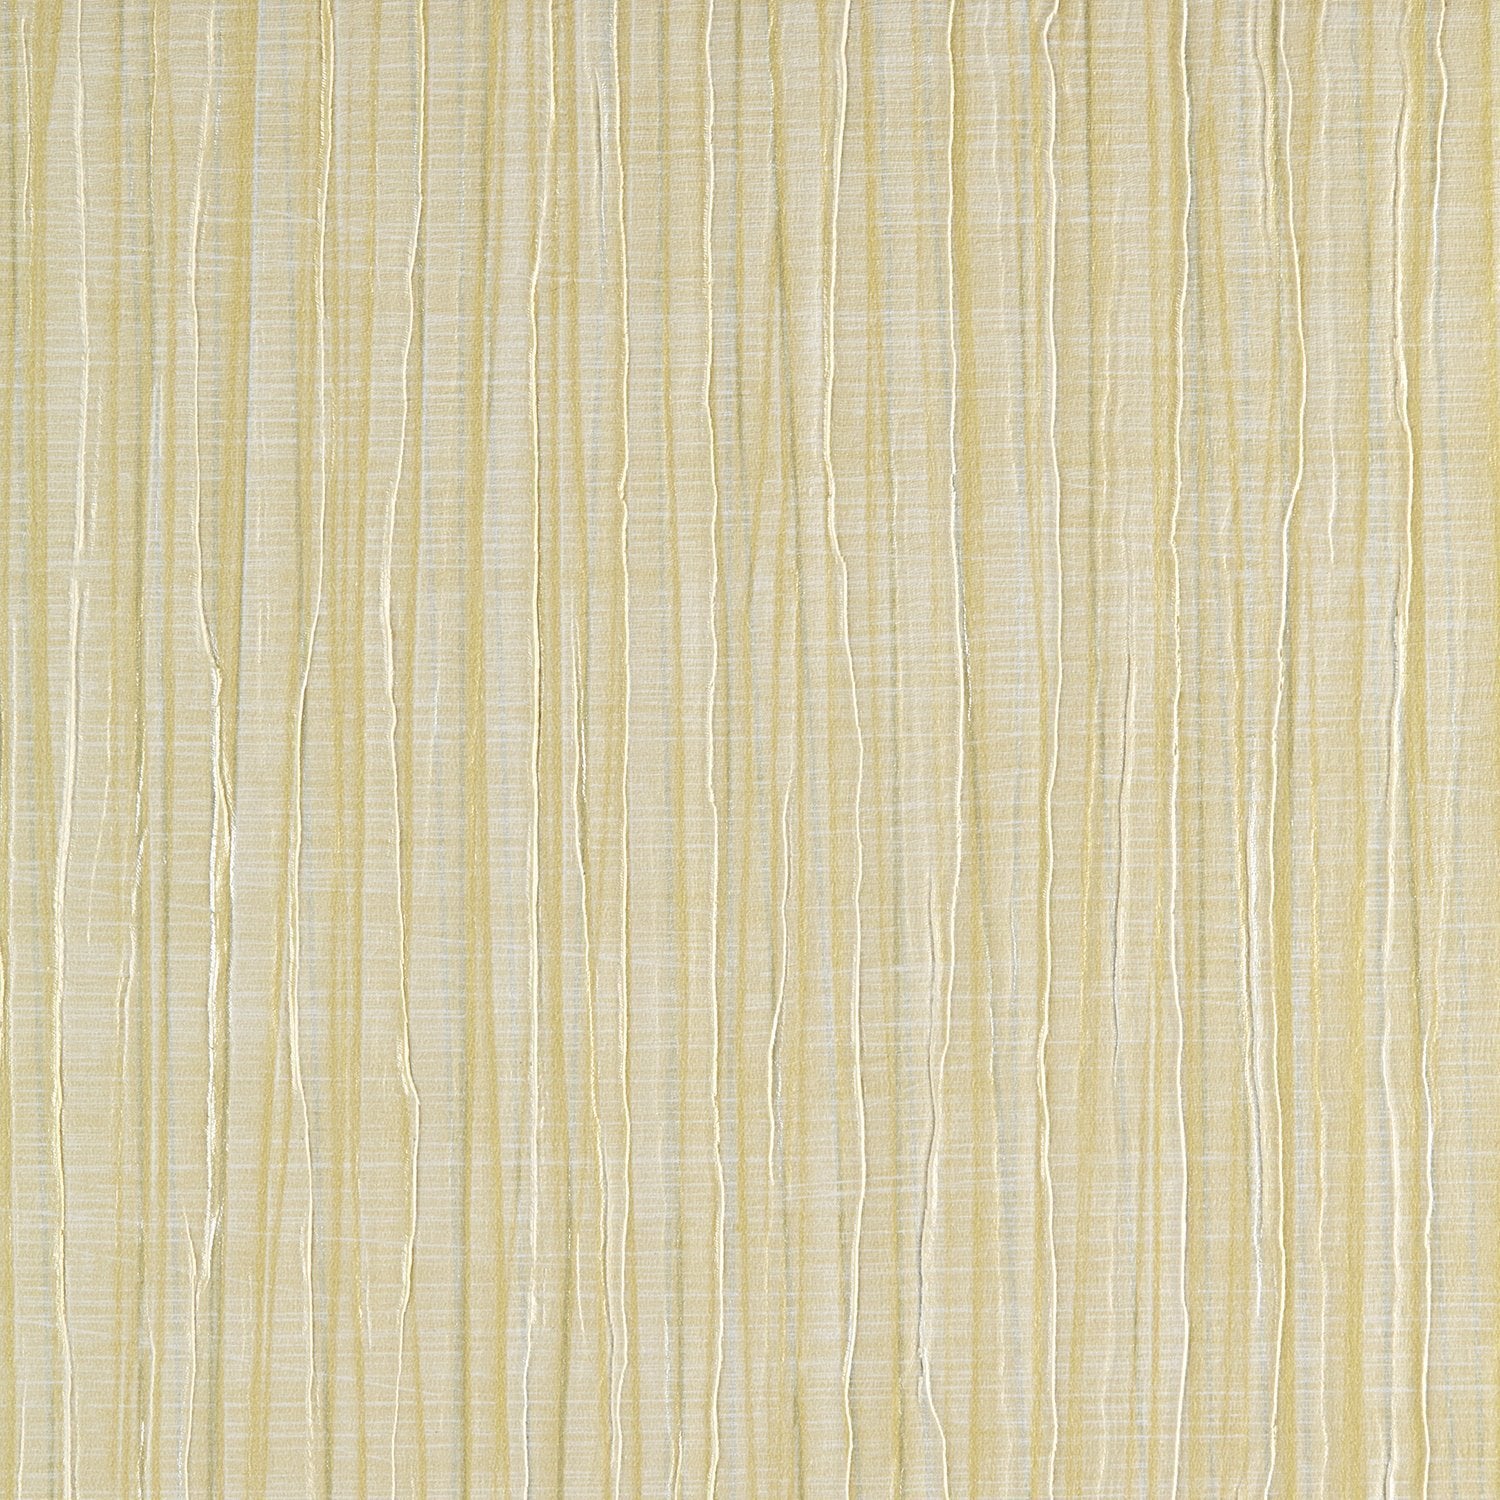 Vogue Pleat - Y47006 - Wallcovering - Vycon - Kube Contract